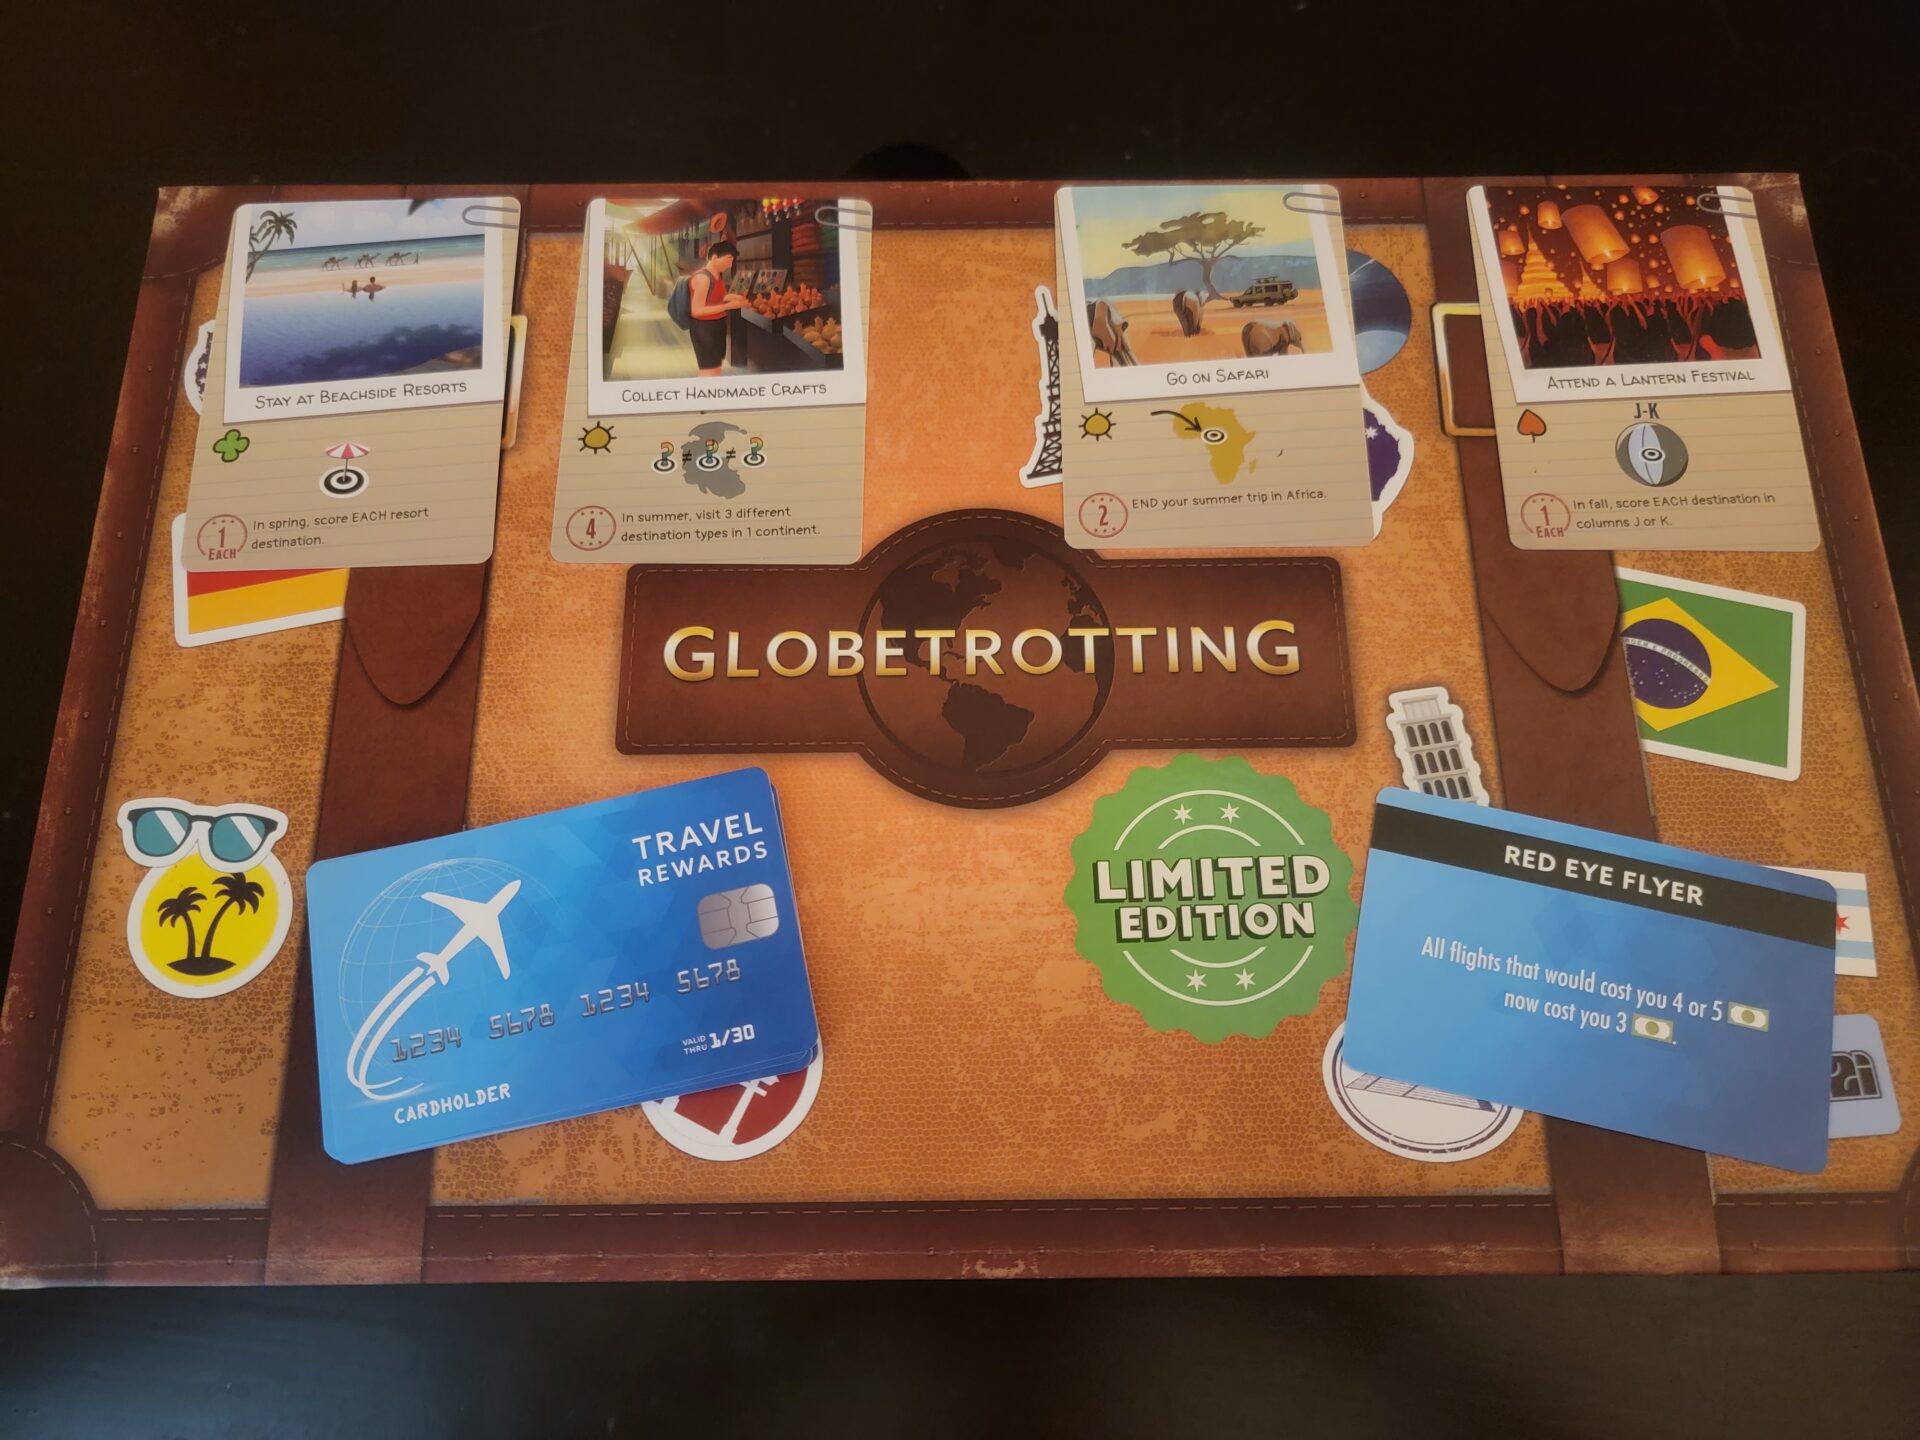 Globetrotting board game box on a table.